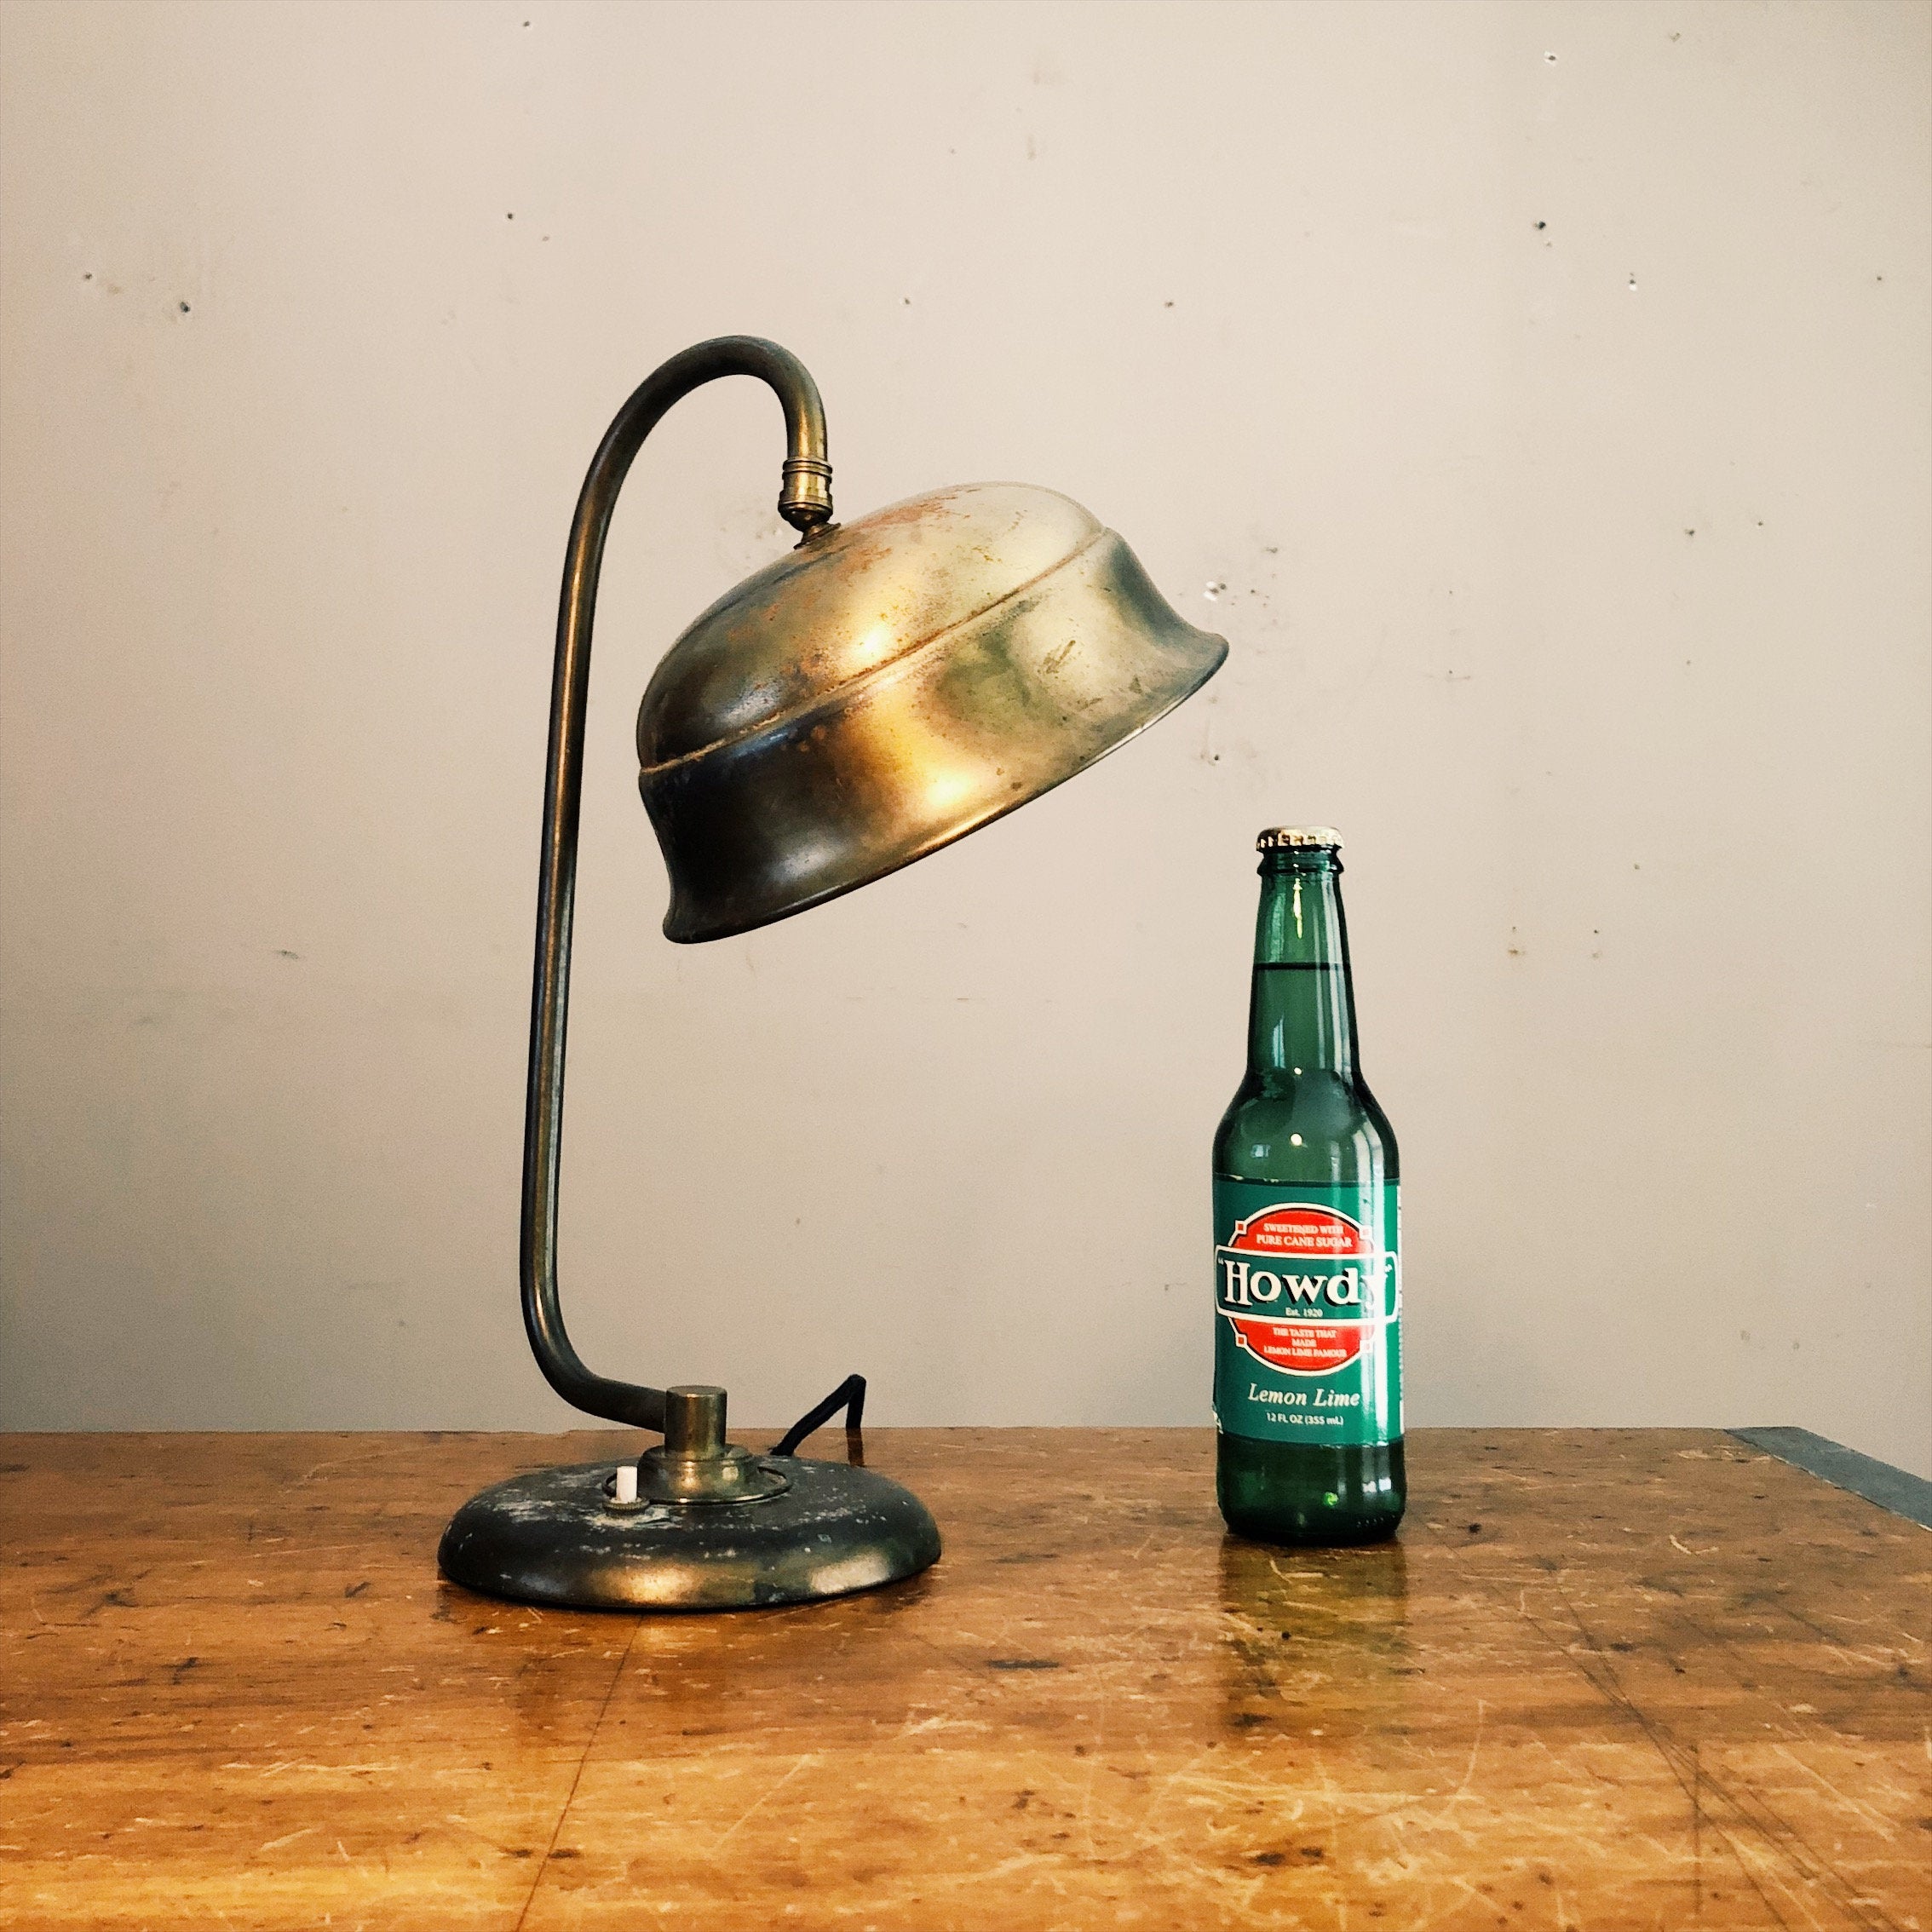 Bauhaus Style Table Lamp with Knuckle Shade Adjuster - Original Antique Desk Lamp - Industrial Decor - Banker's Lamp - Brass and Metal -